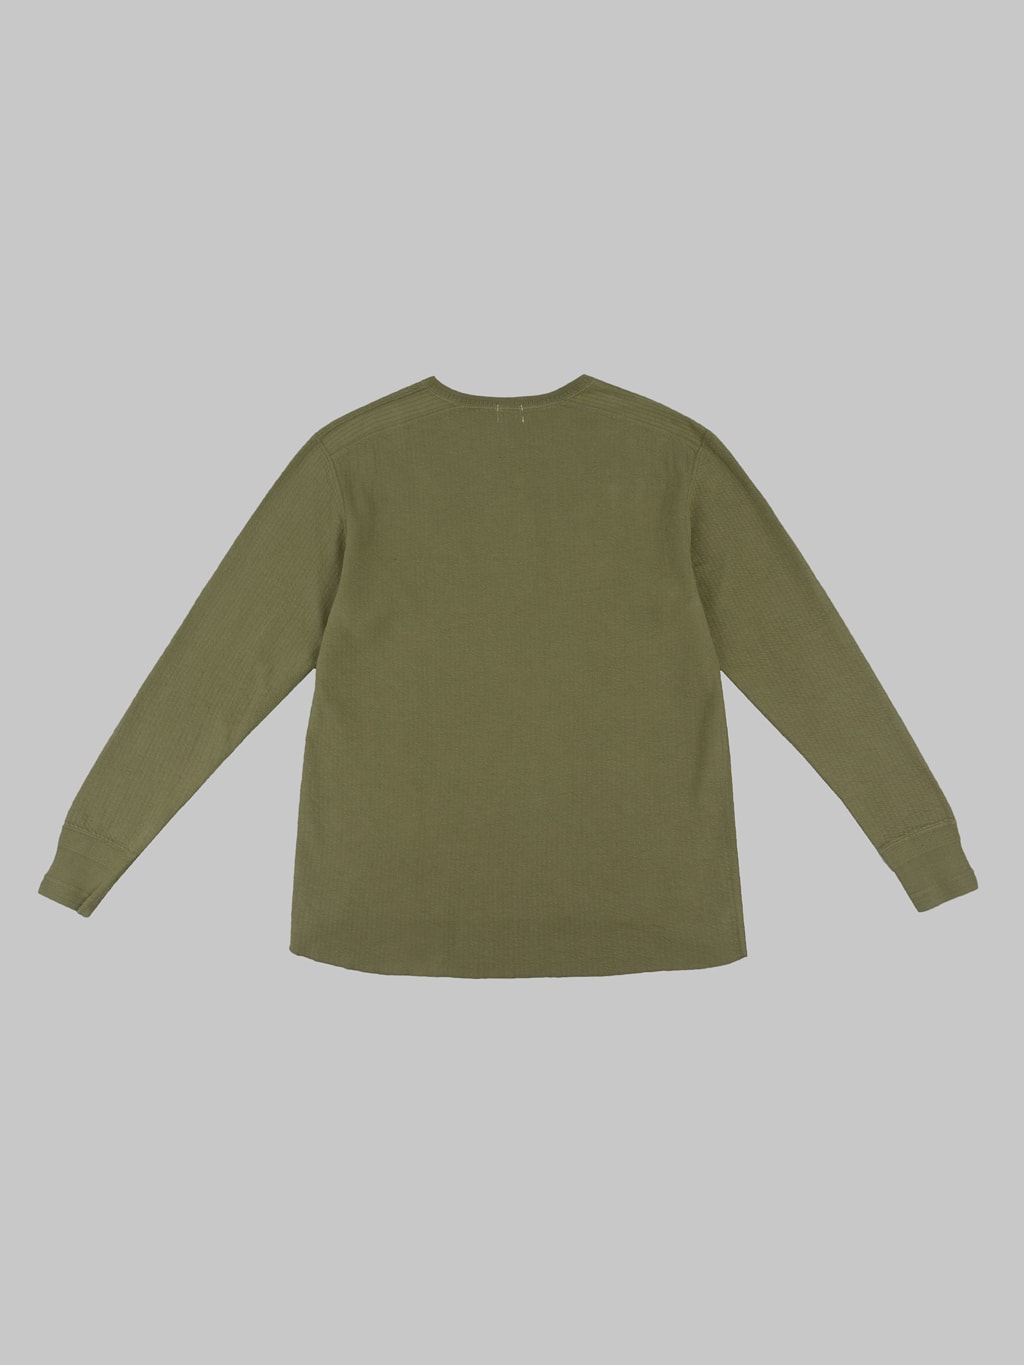 Loop Weft Double Face Jacquard henley Thermal army olive  back